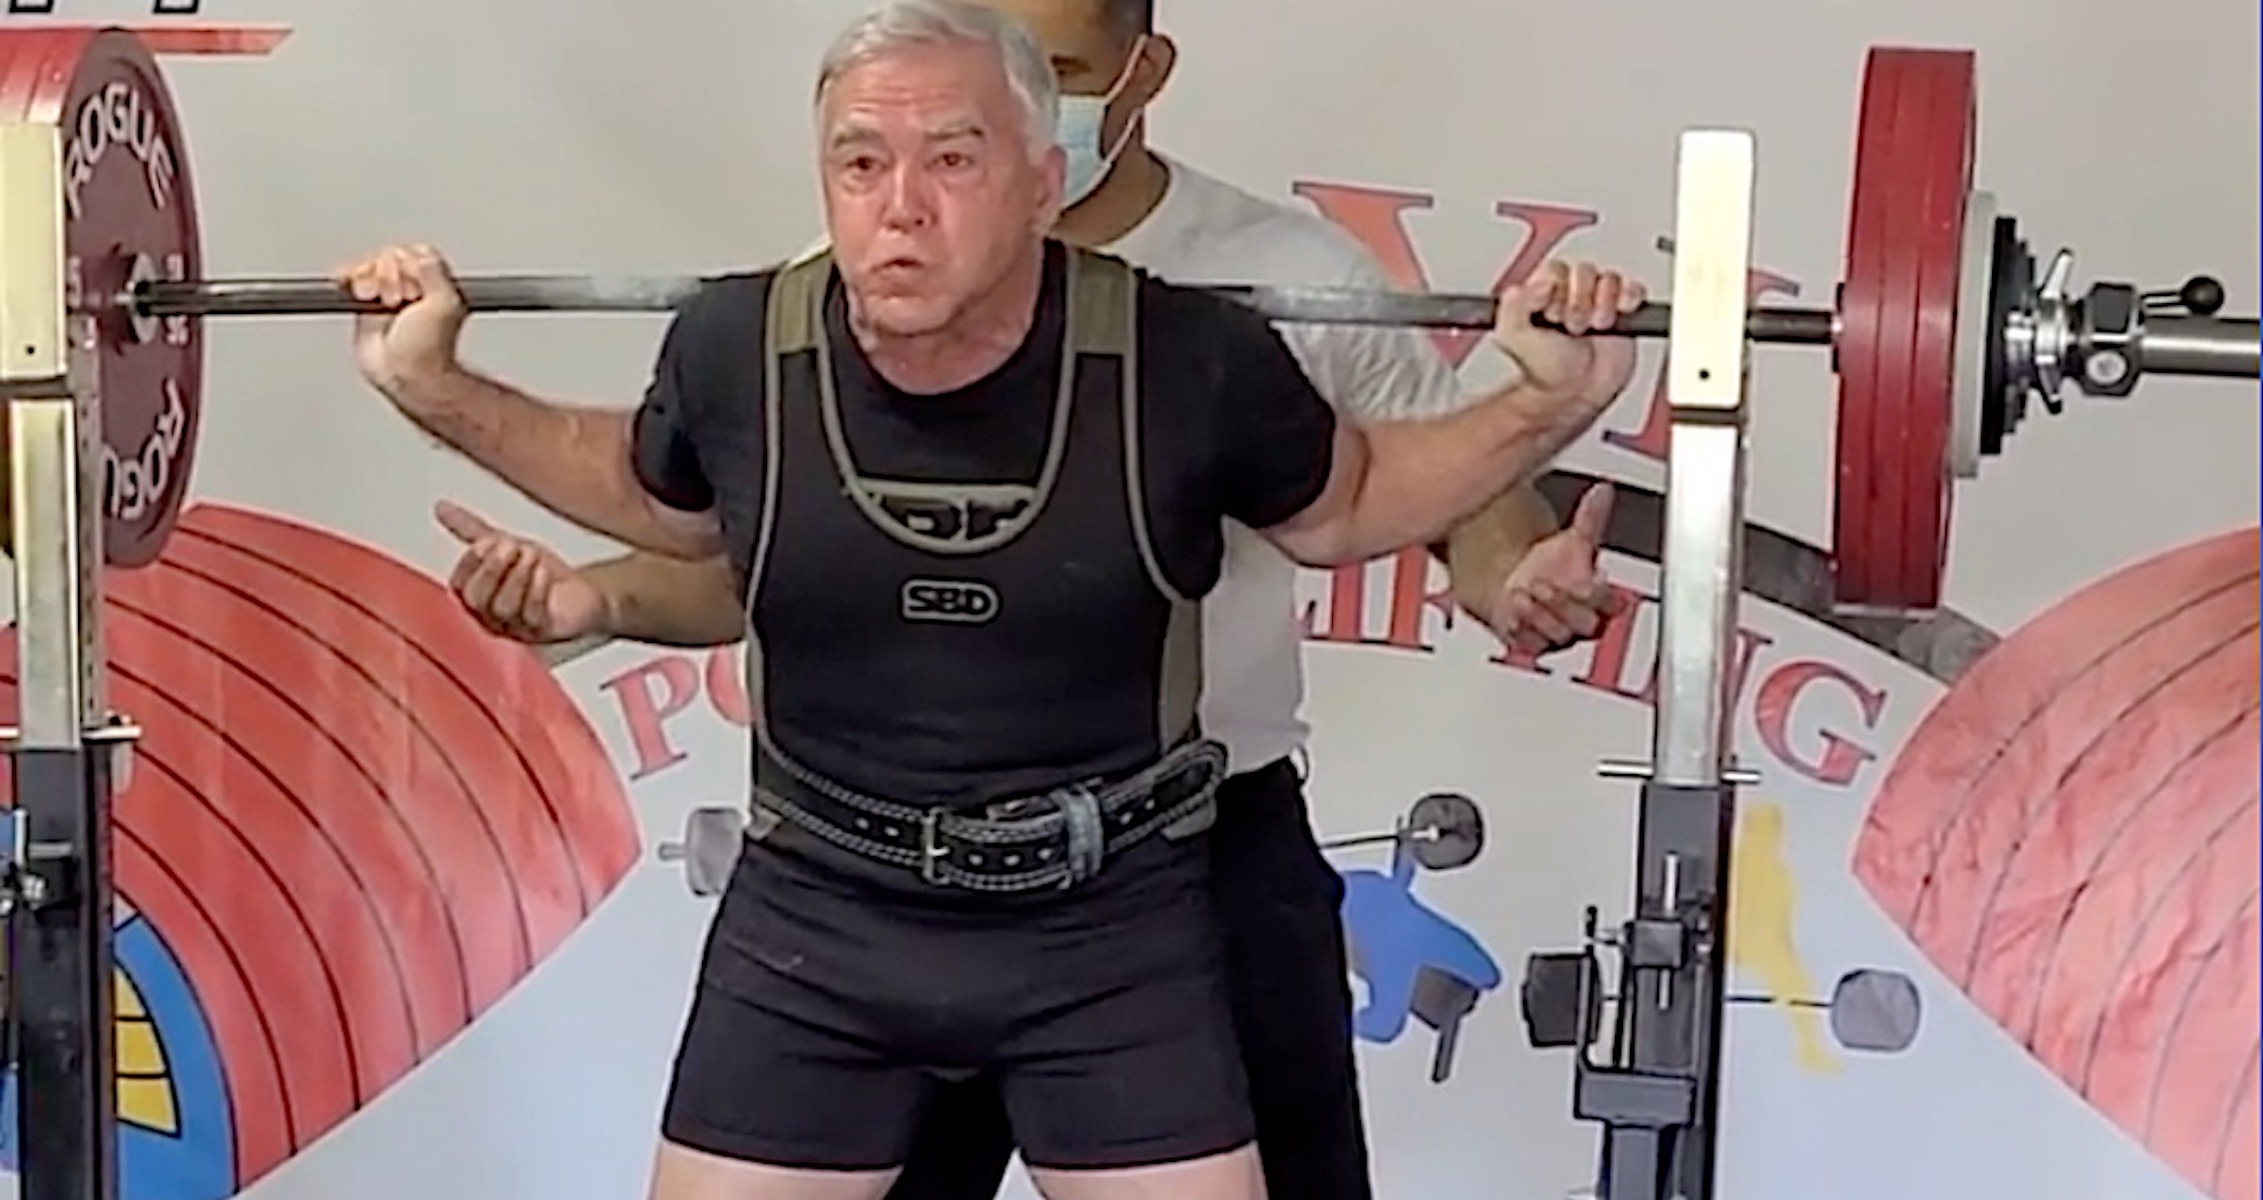 John LaFlamme Squats 426.5 Pounds at 71 Years Old